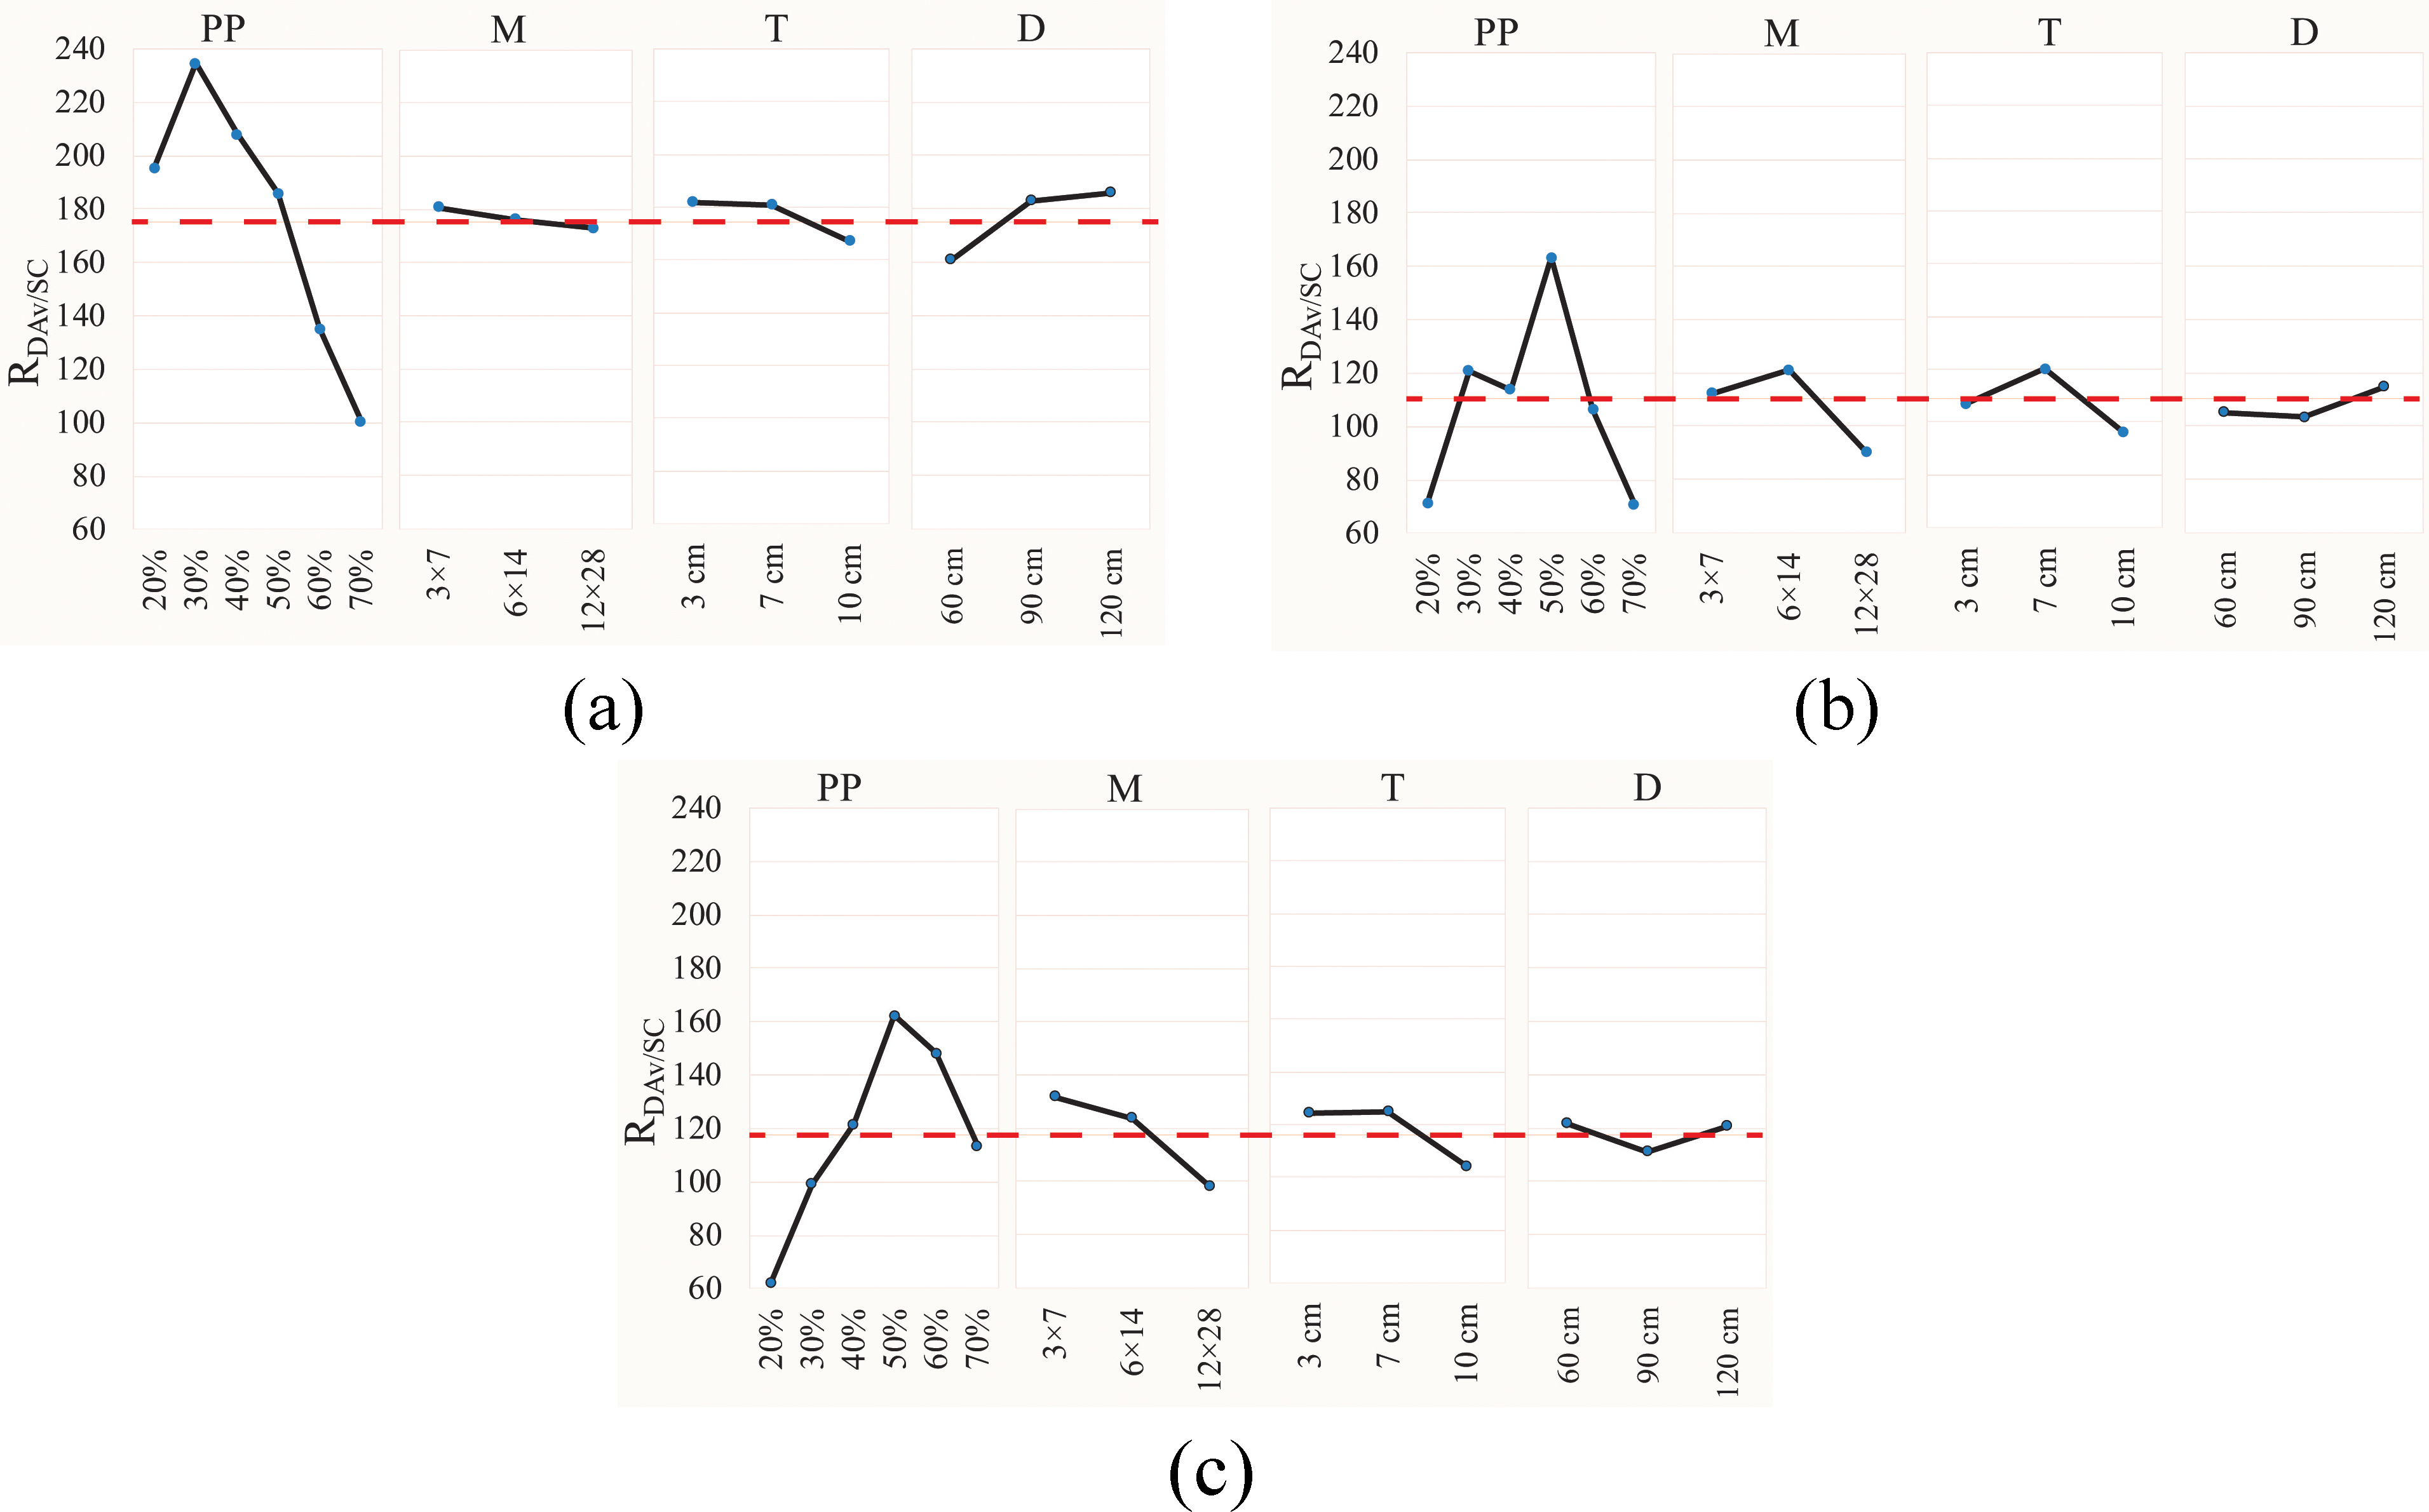 Main effects plot for RDAVfully/SC (a) South, (b) East, and (c) West. The red dashed line shows the overall mean of RDAVfully/SC at every orientation.